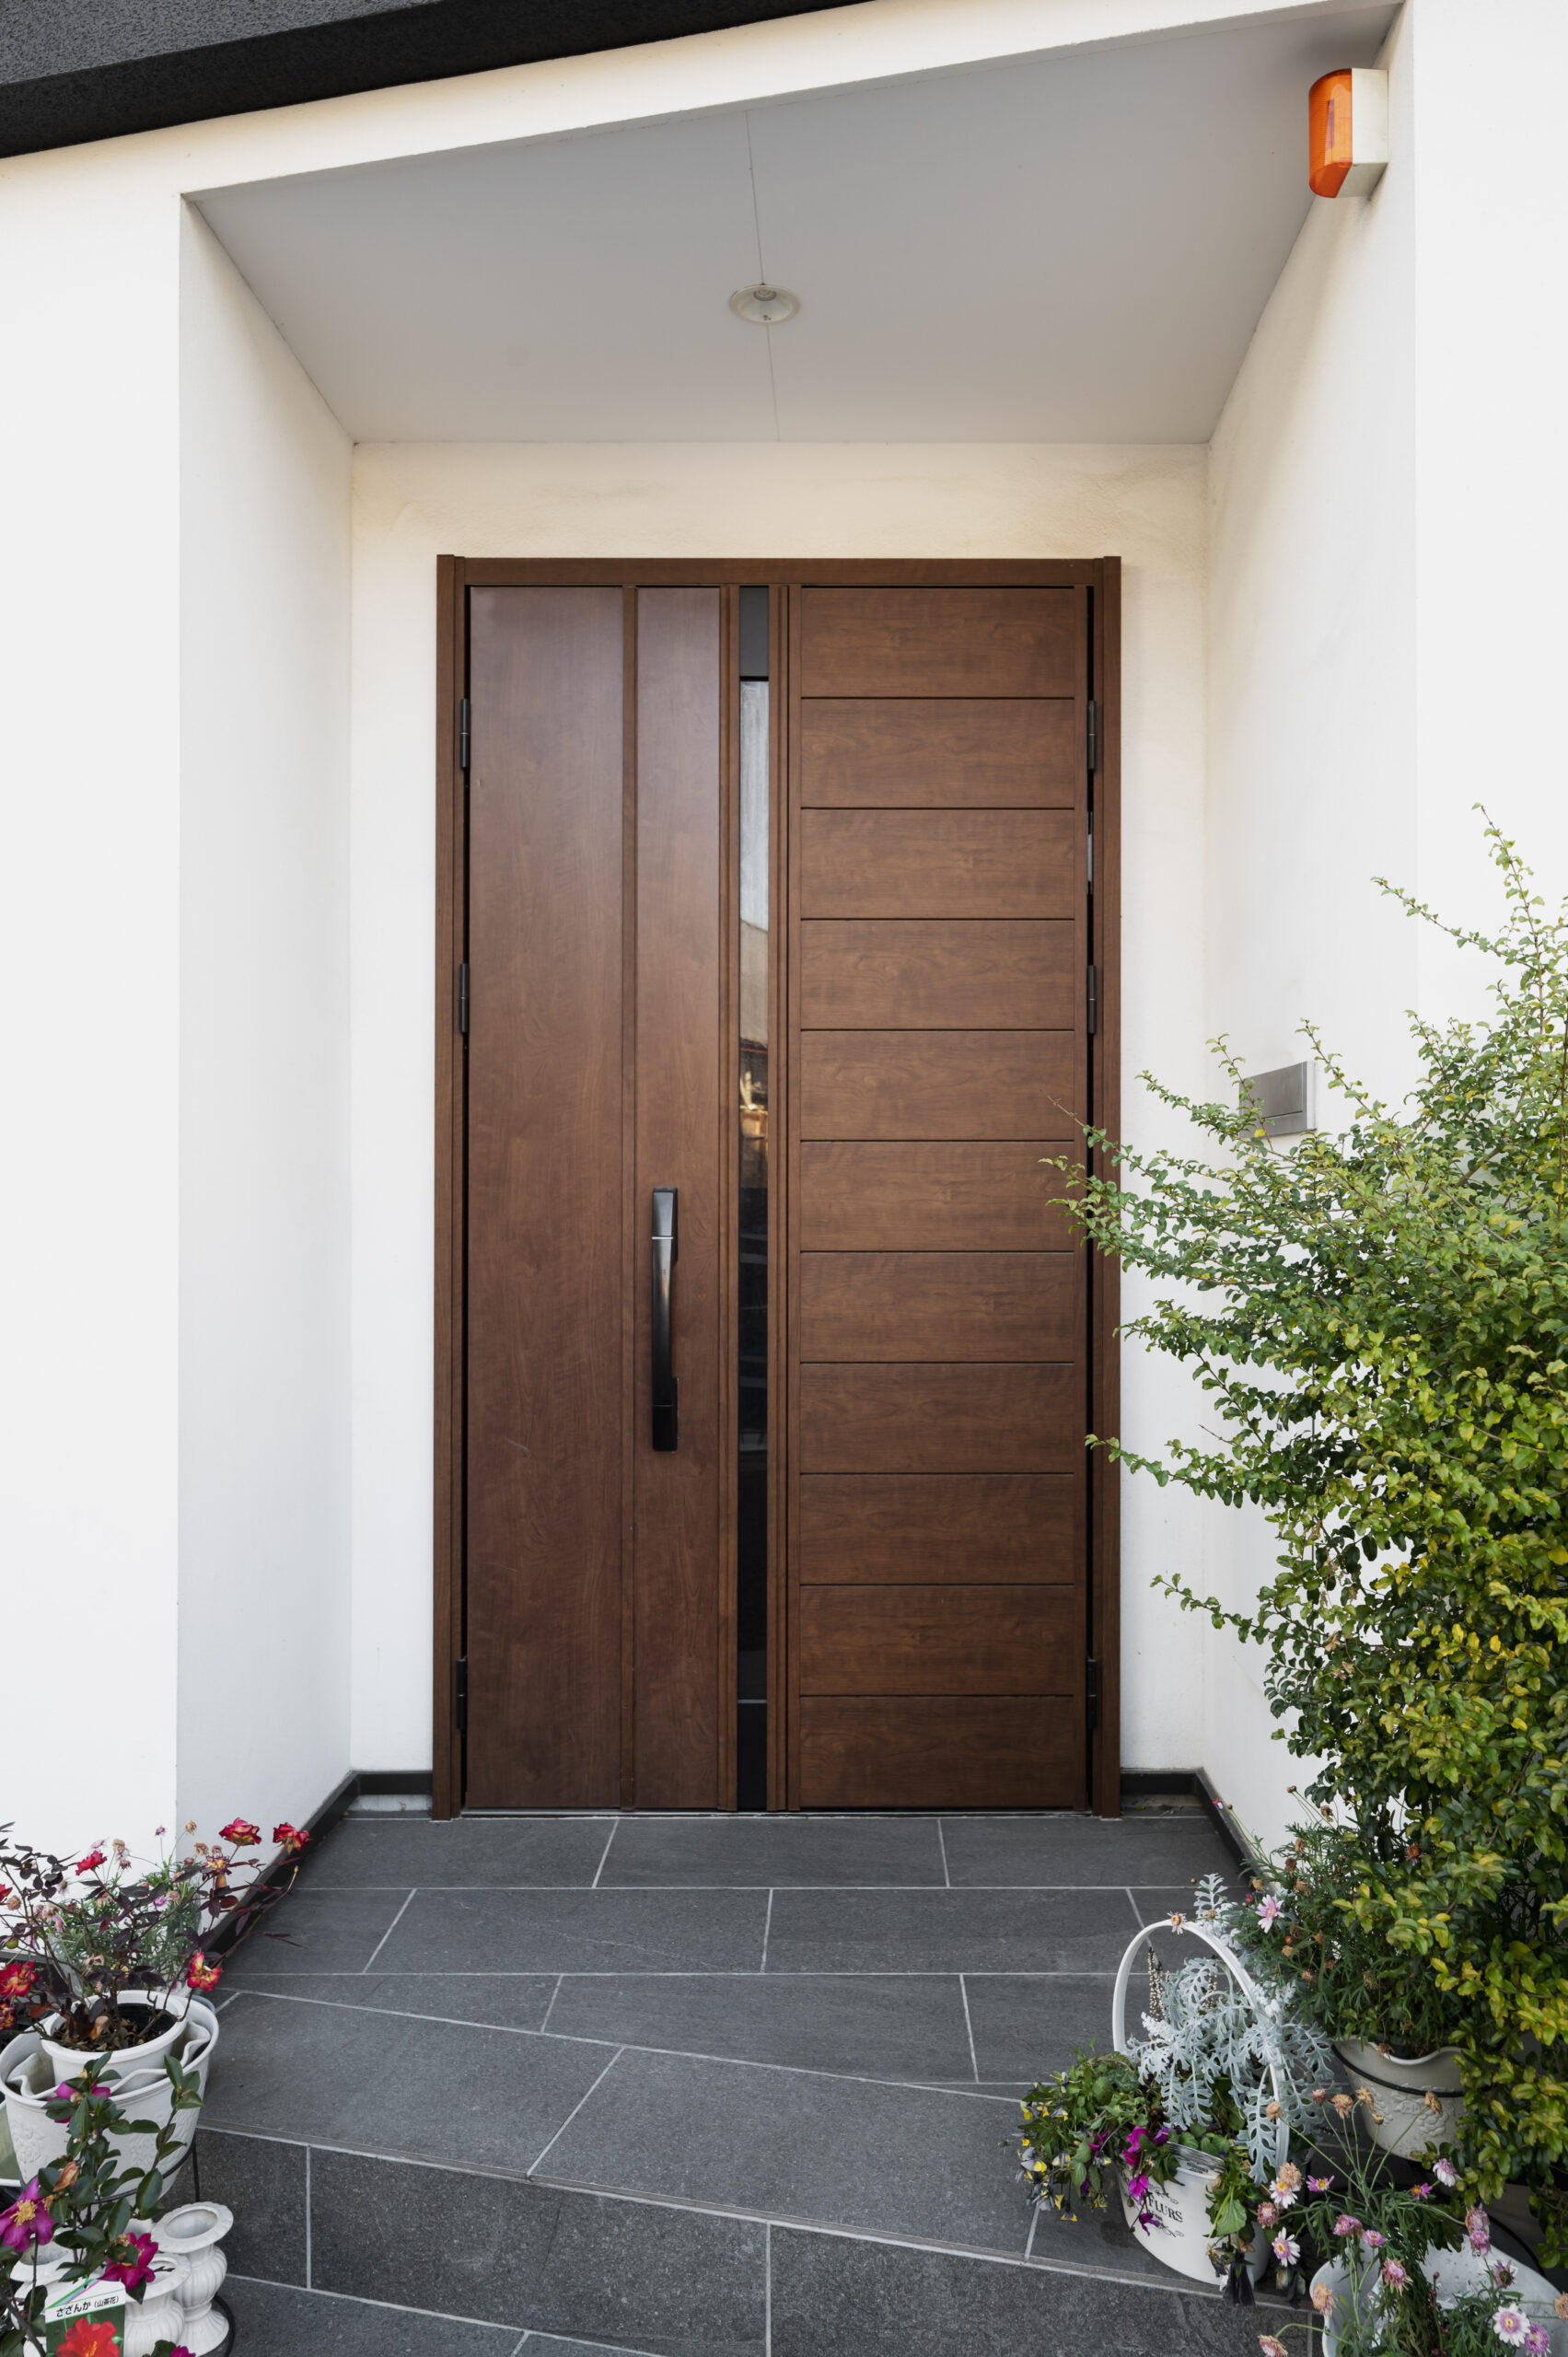 Membrane Doors vs. Laminated Doors: What is the Difference?